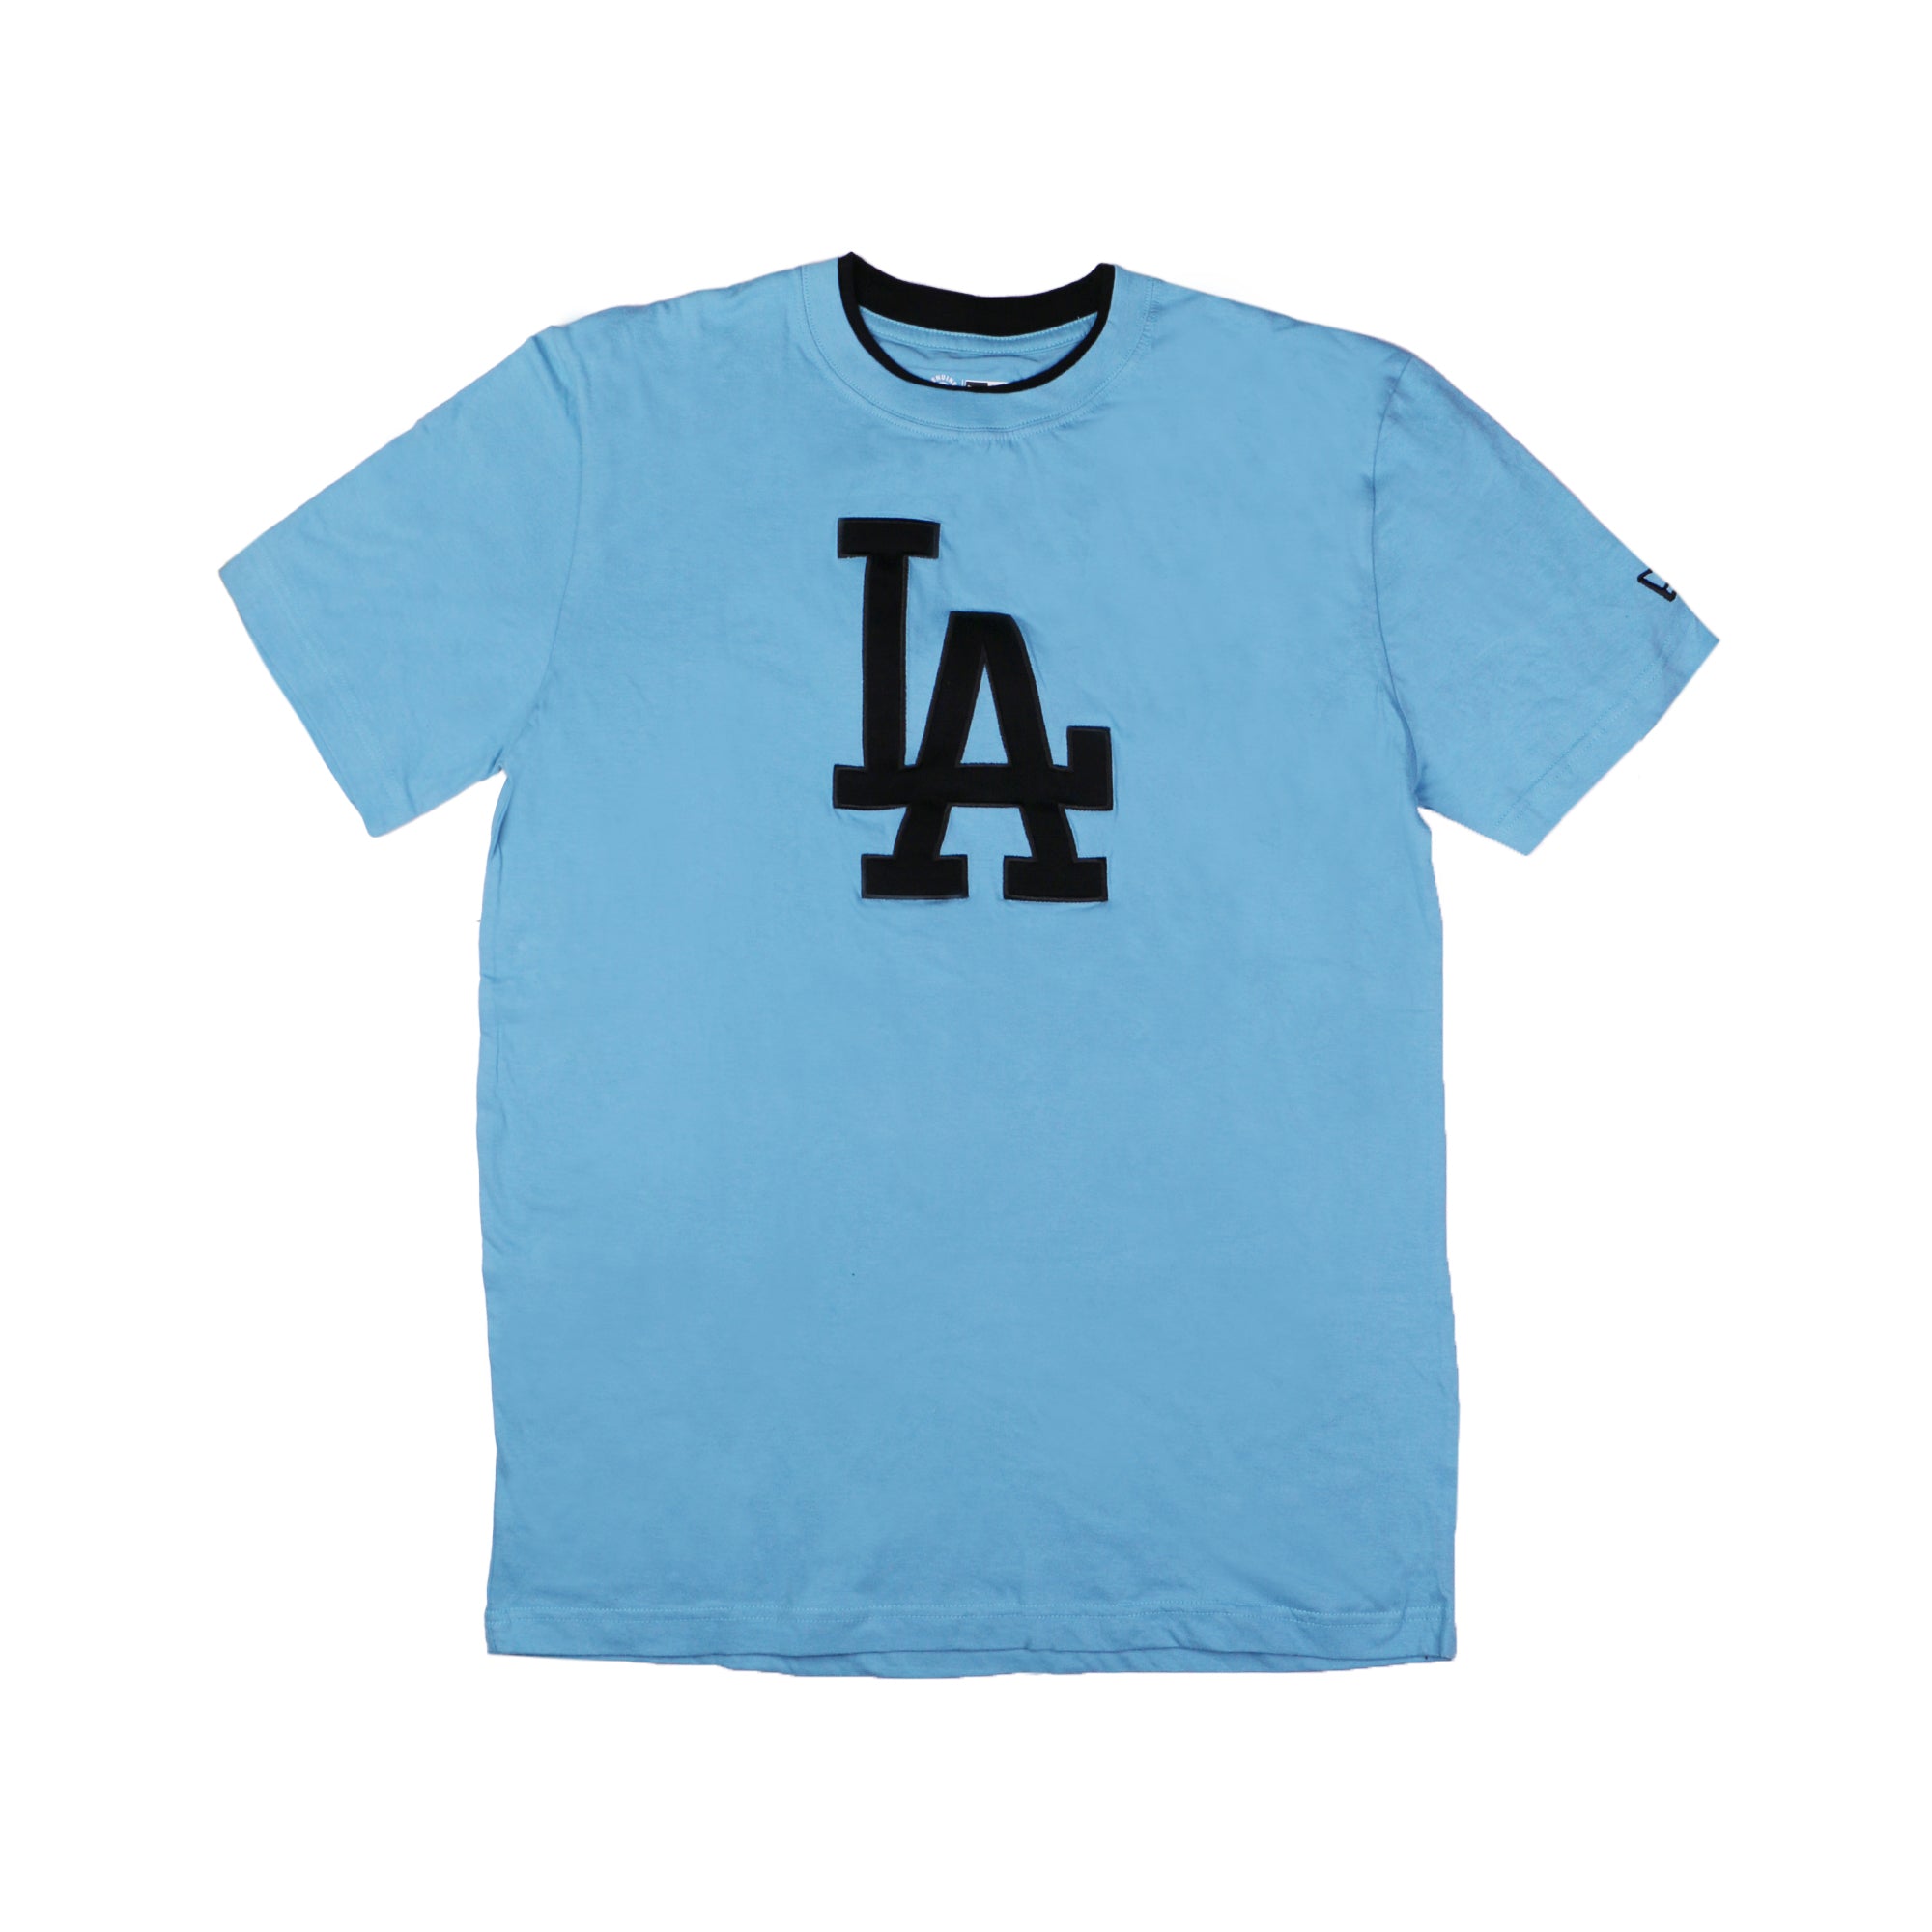 Mitchell & Ness Cotton Tank Top Los Angeles Dodgers Royal Blue